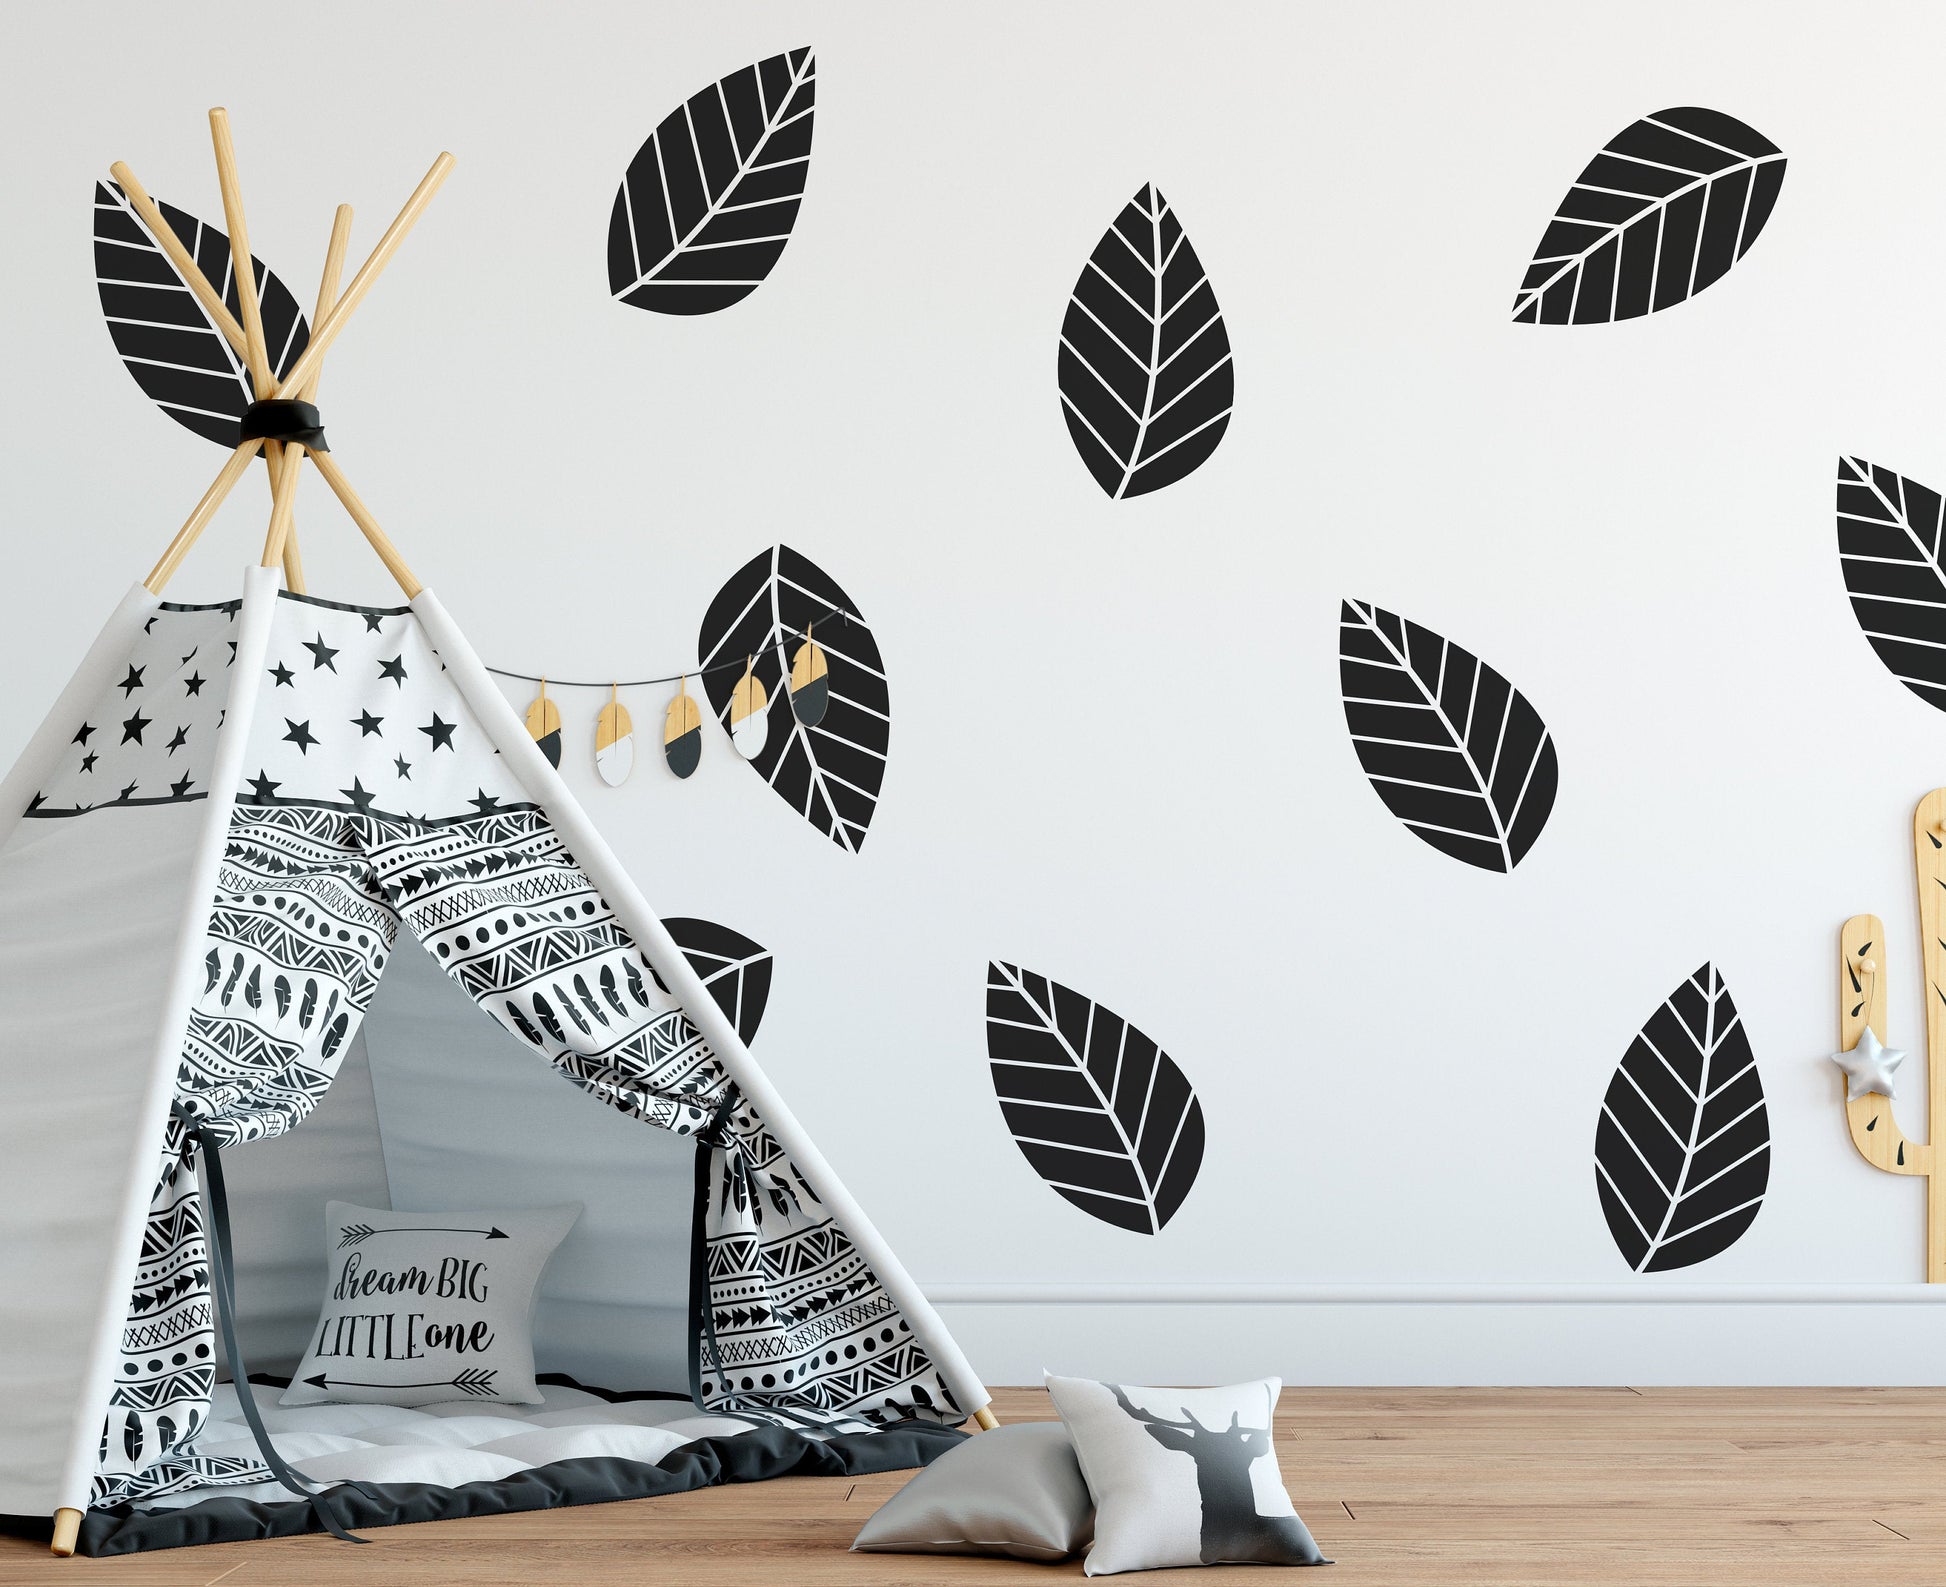 Large Botanical Leaves Wall Stickers (9 Pack)